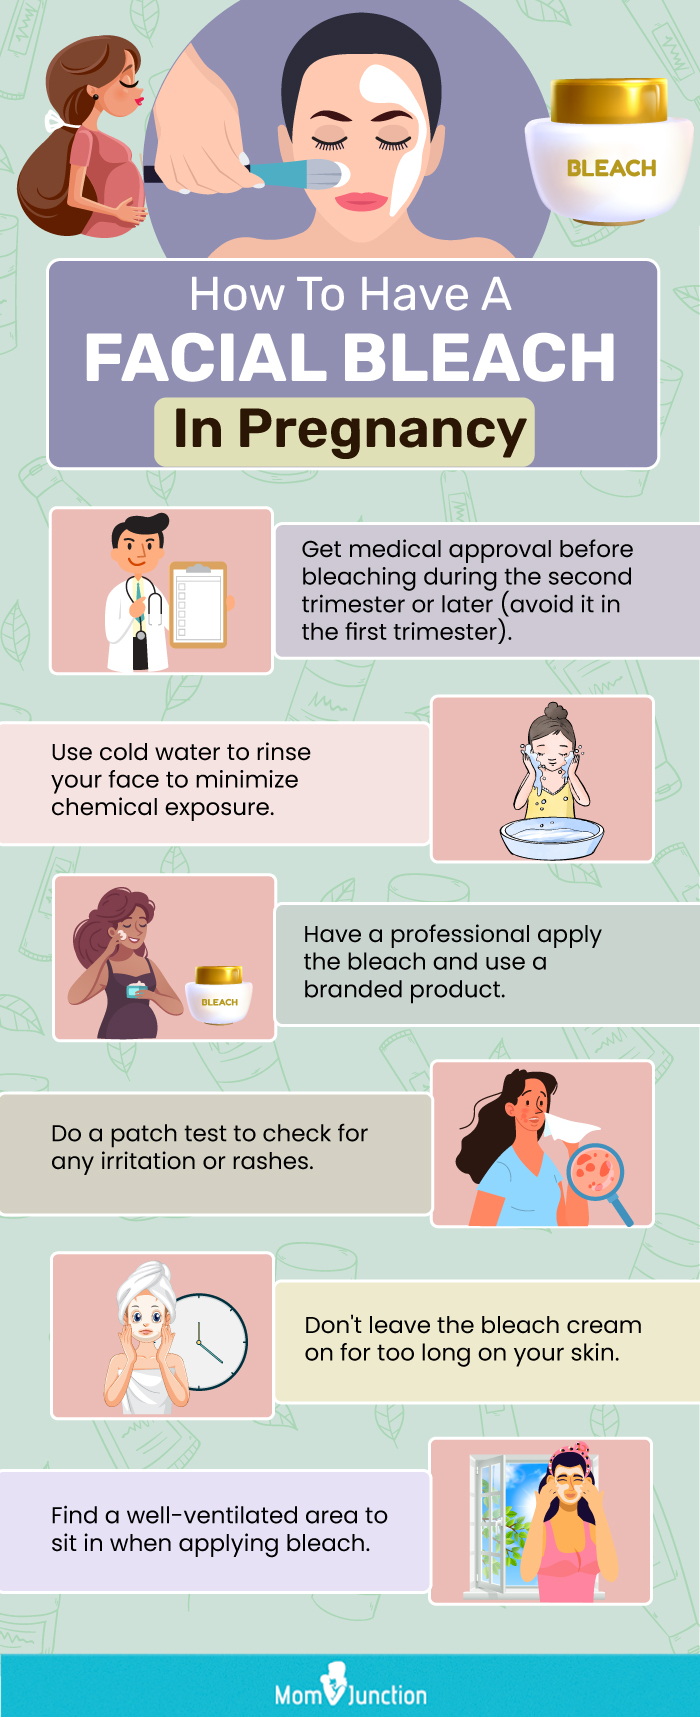 tips on facial bleaching during pregnancy [infographic]